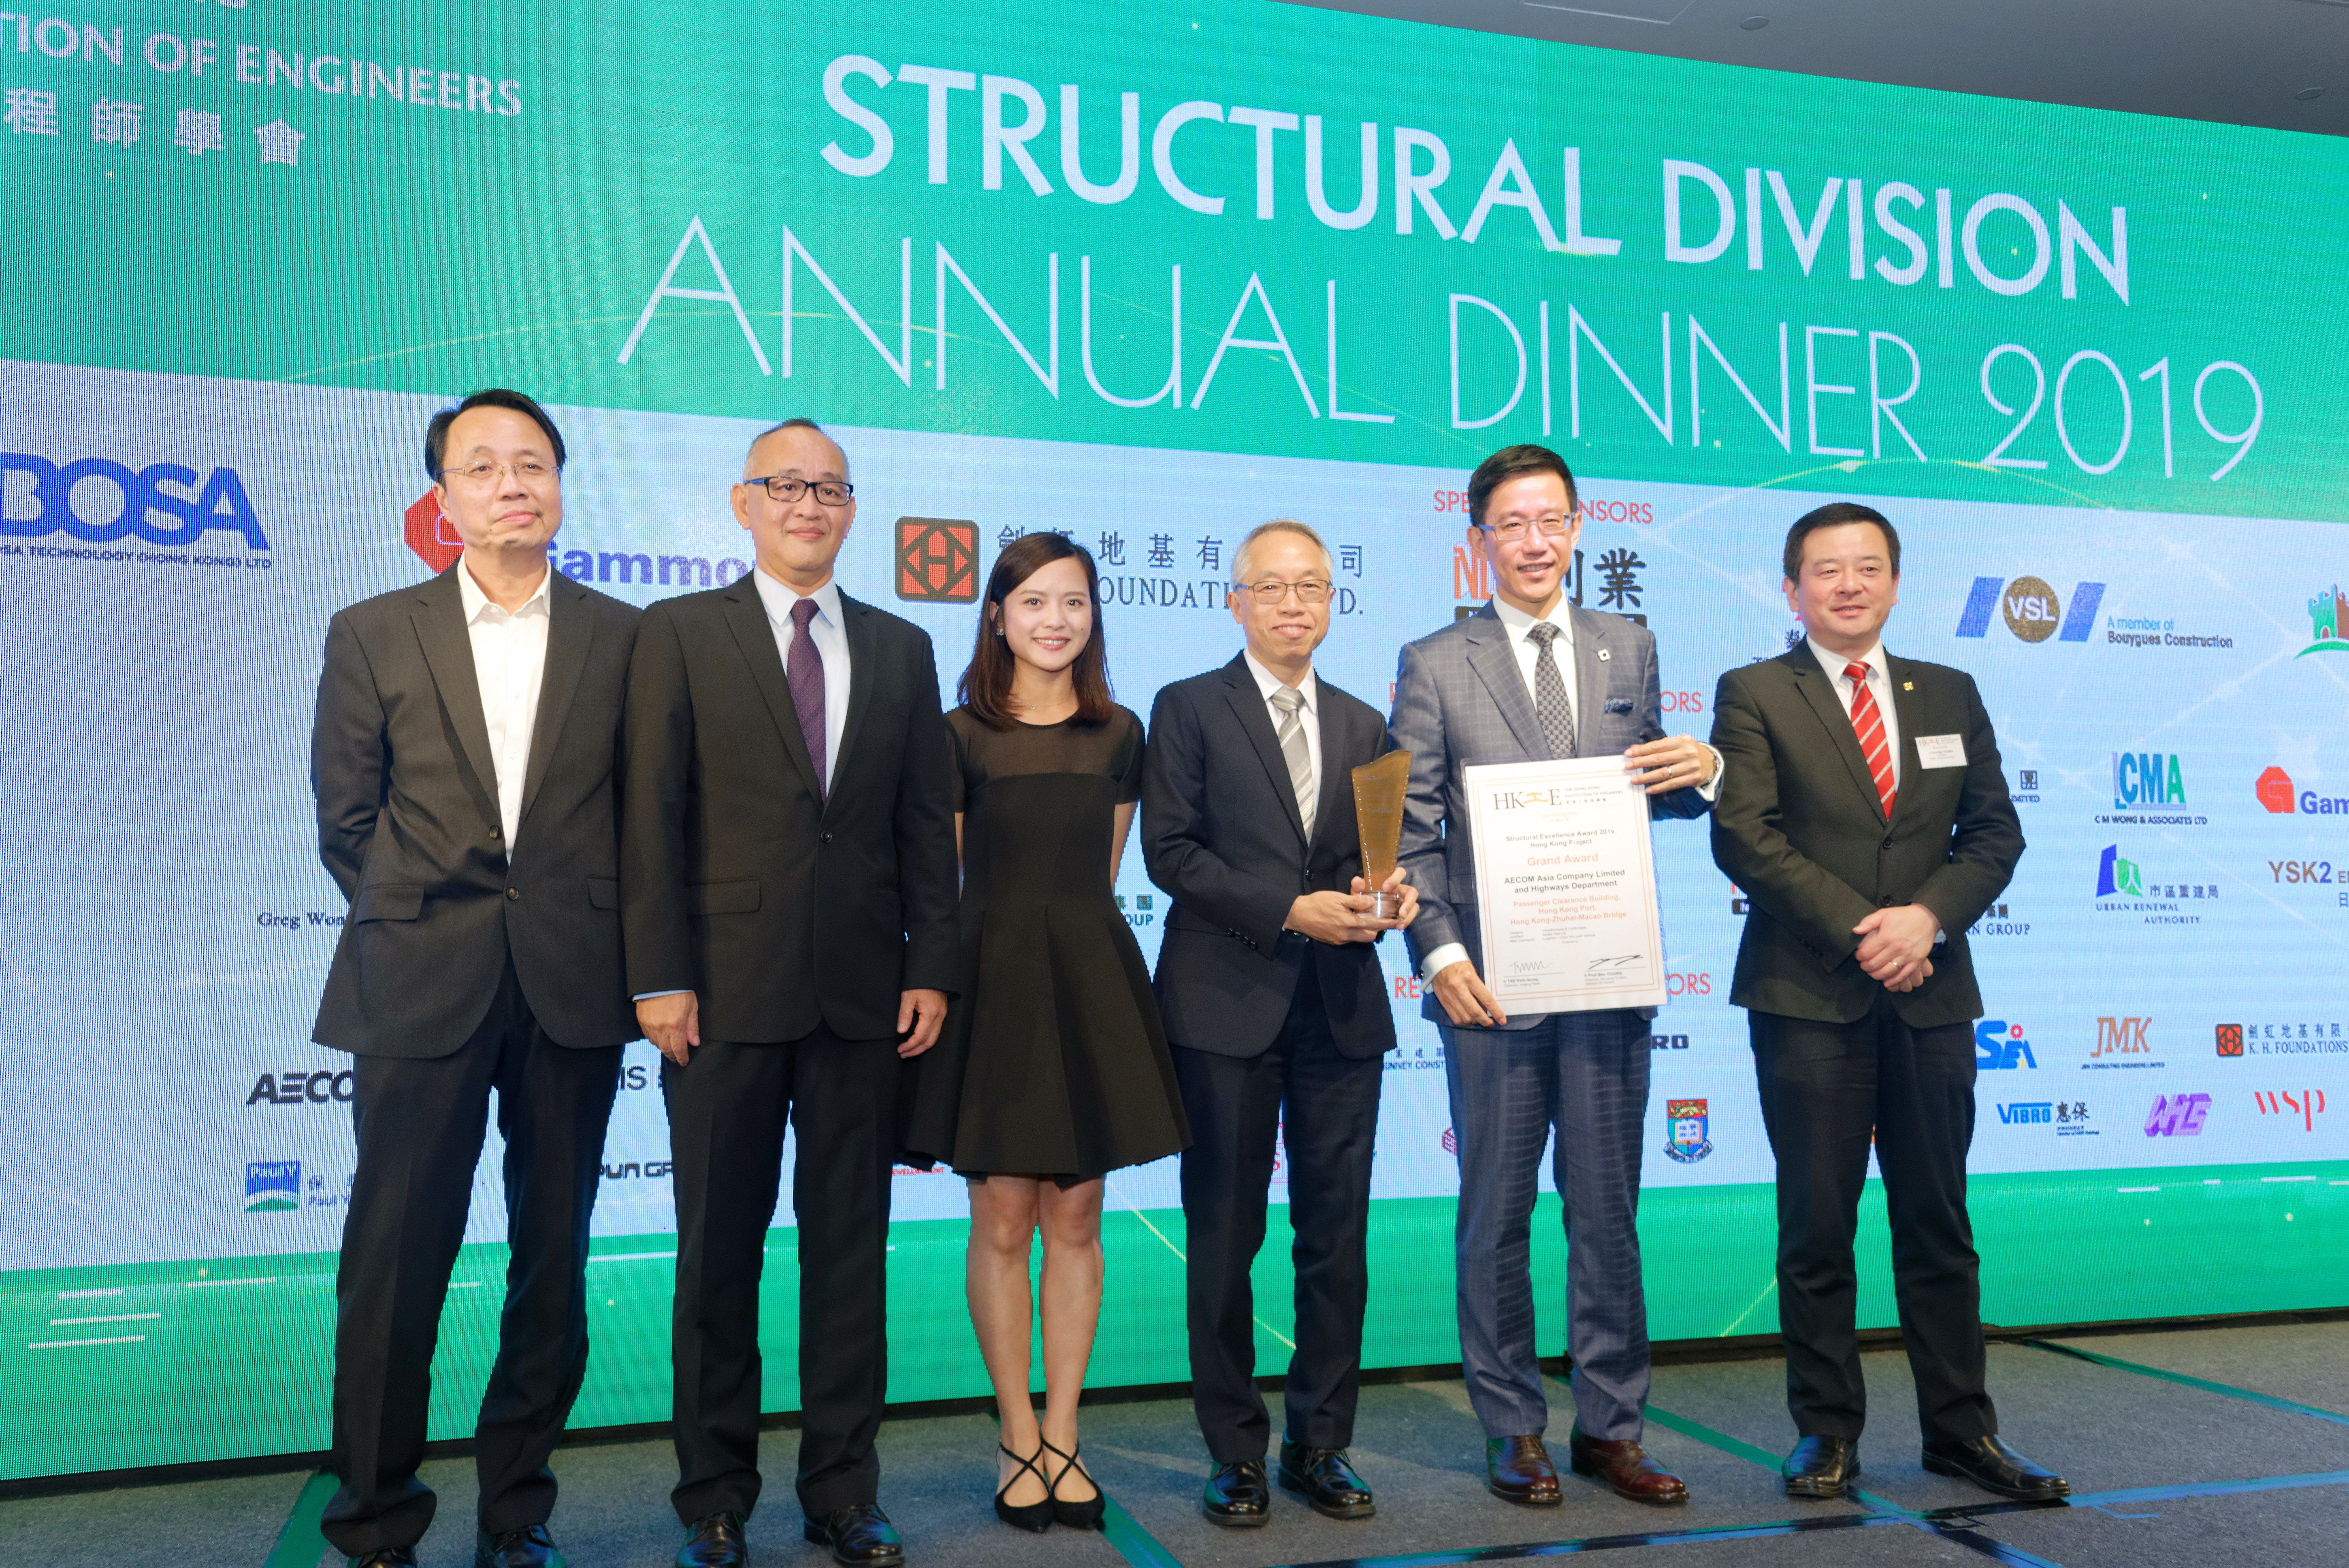 The Hong Kong – Zhuhai – Macao Bridge Hong Kong Port Passenger Clearance Building was awarded the Structural Excellence Award 2019 - Grand Award (Infrastructures & Footbridges Category).